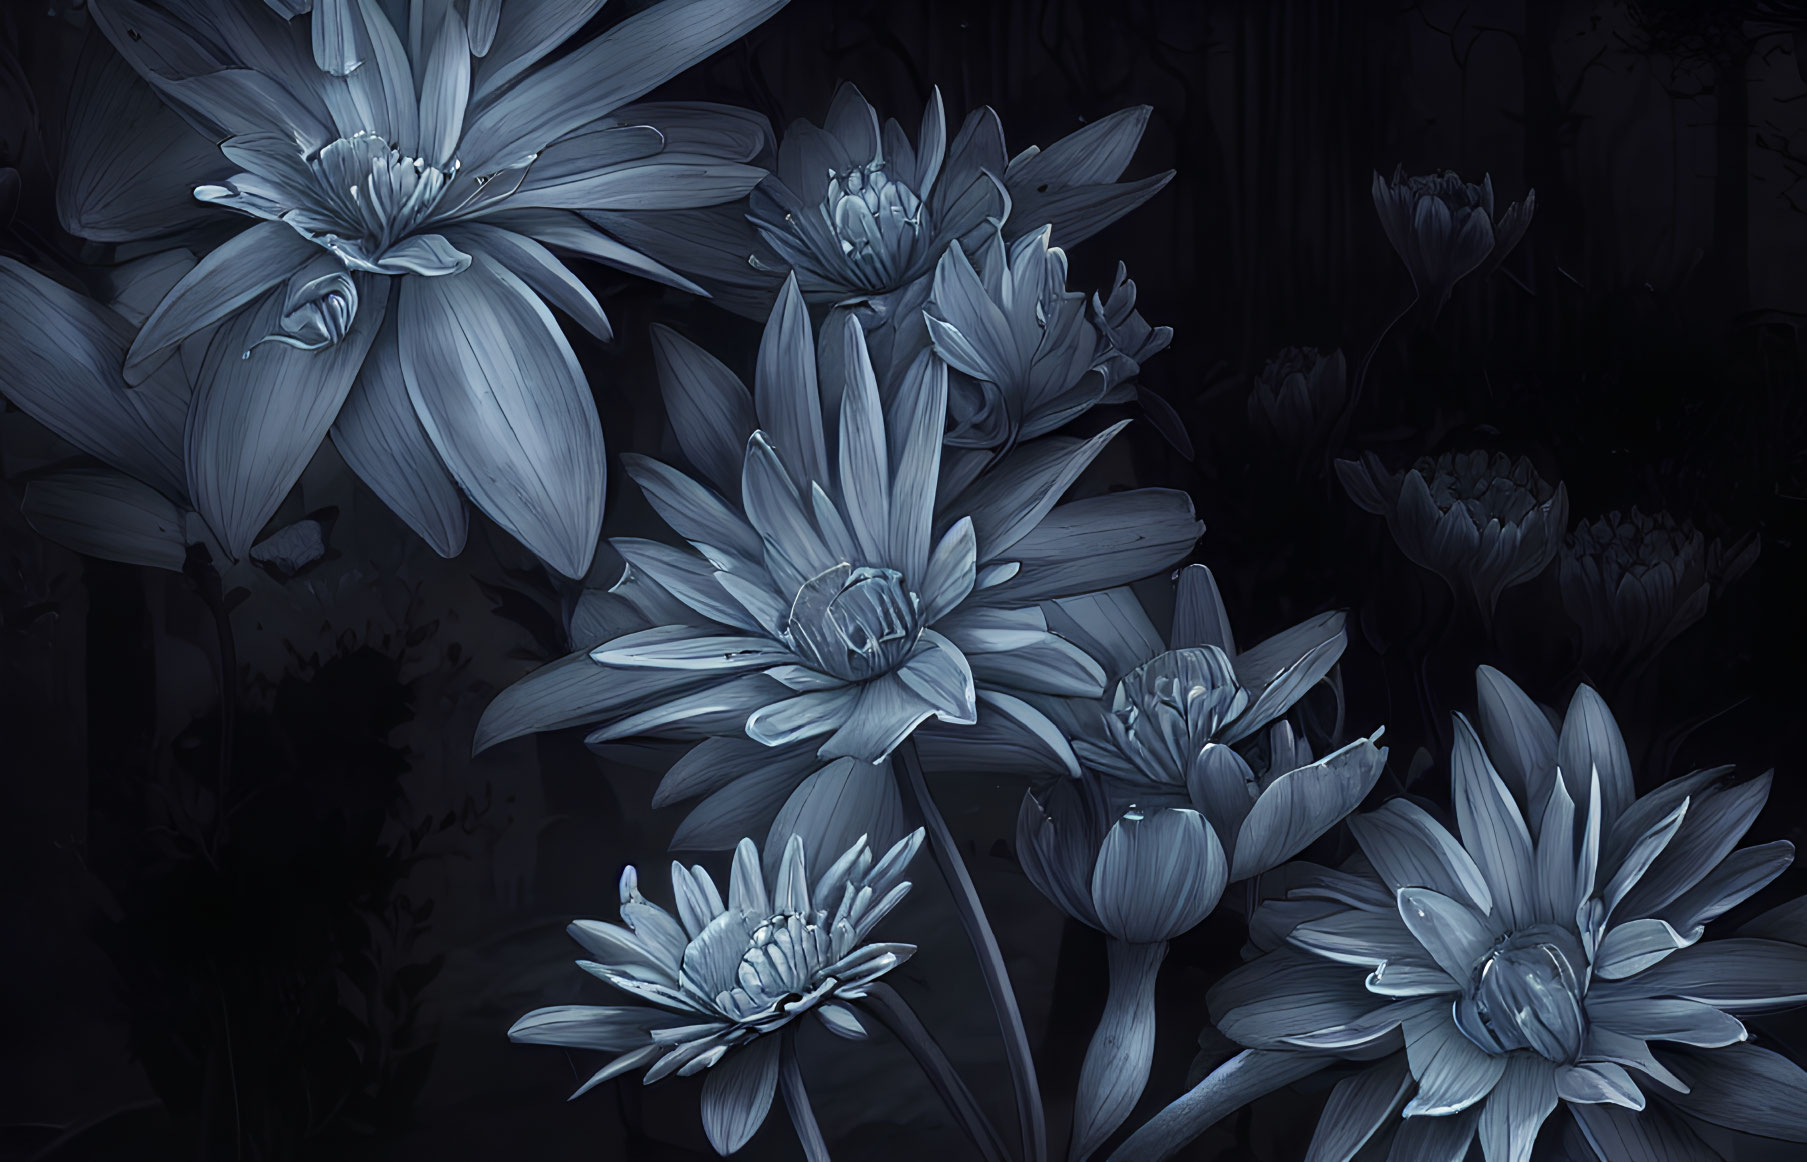 Monochrome image of blooming flowers with layered petals on dark background